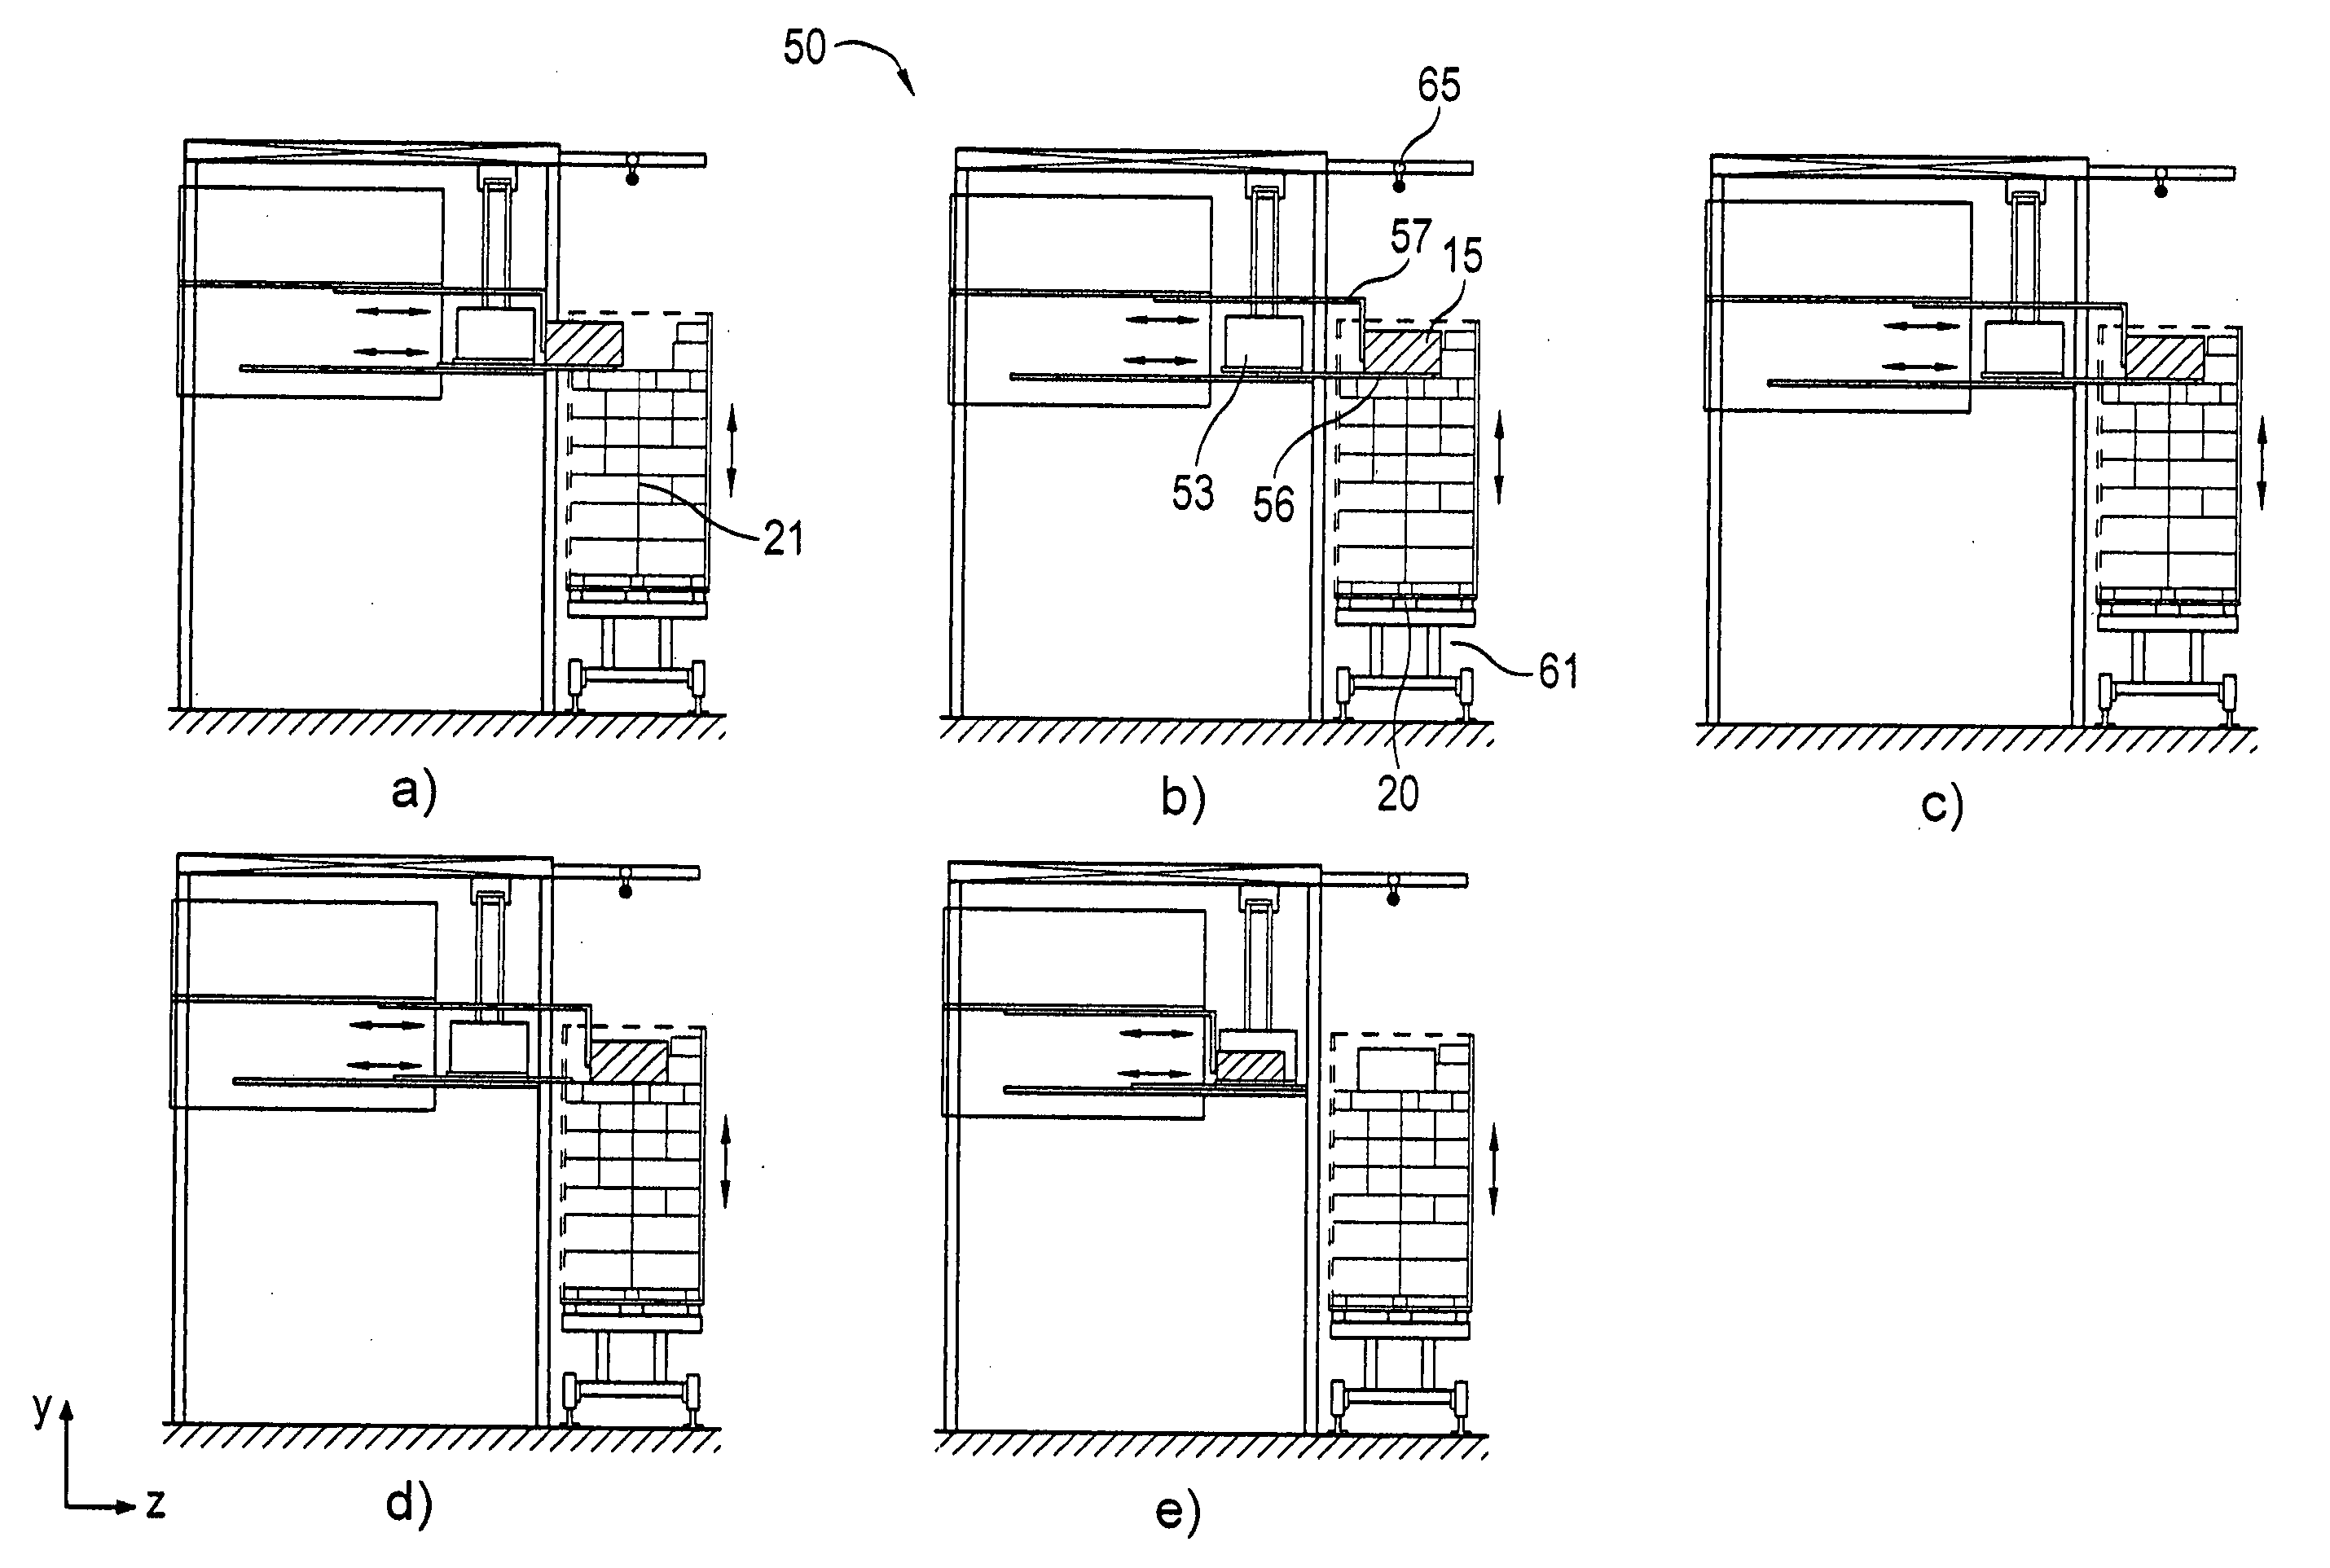 Load-carrier loading apparatus